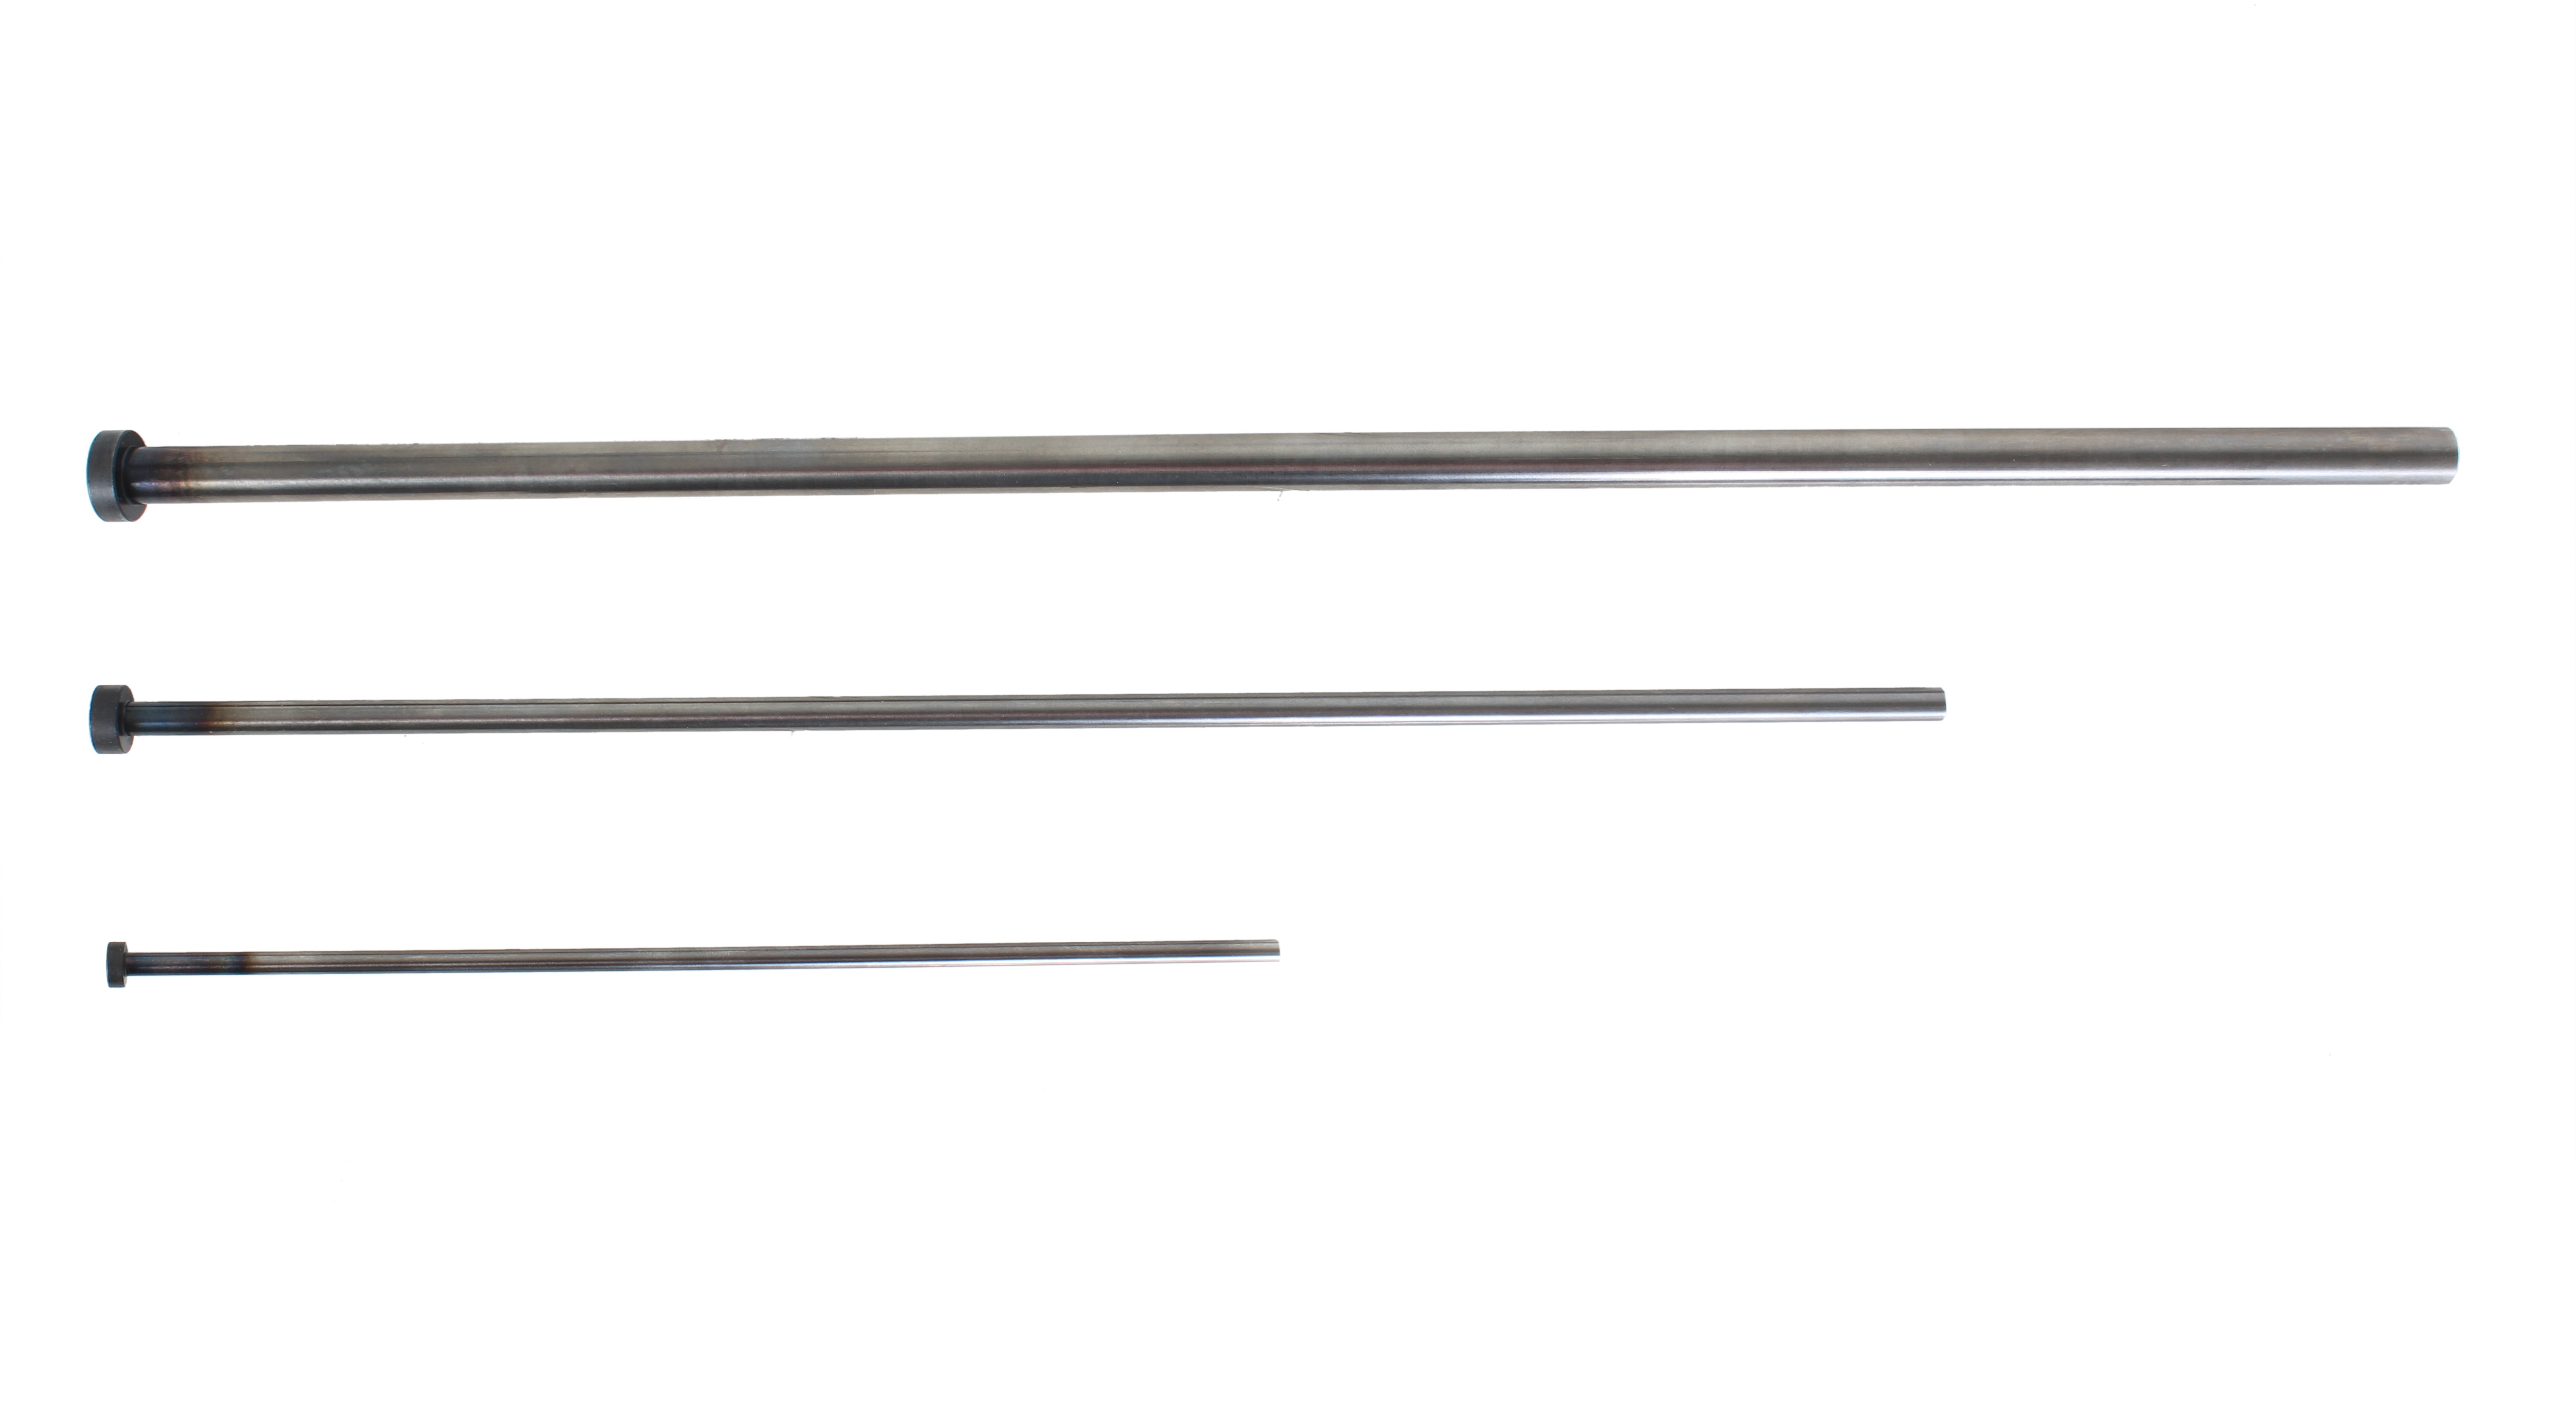 STRAIGHT EJECTOR PINS -DIN Type/SKD61 equivalent+Nitrided/Standard- (D-EPN20-200) 